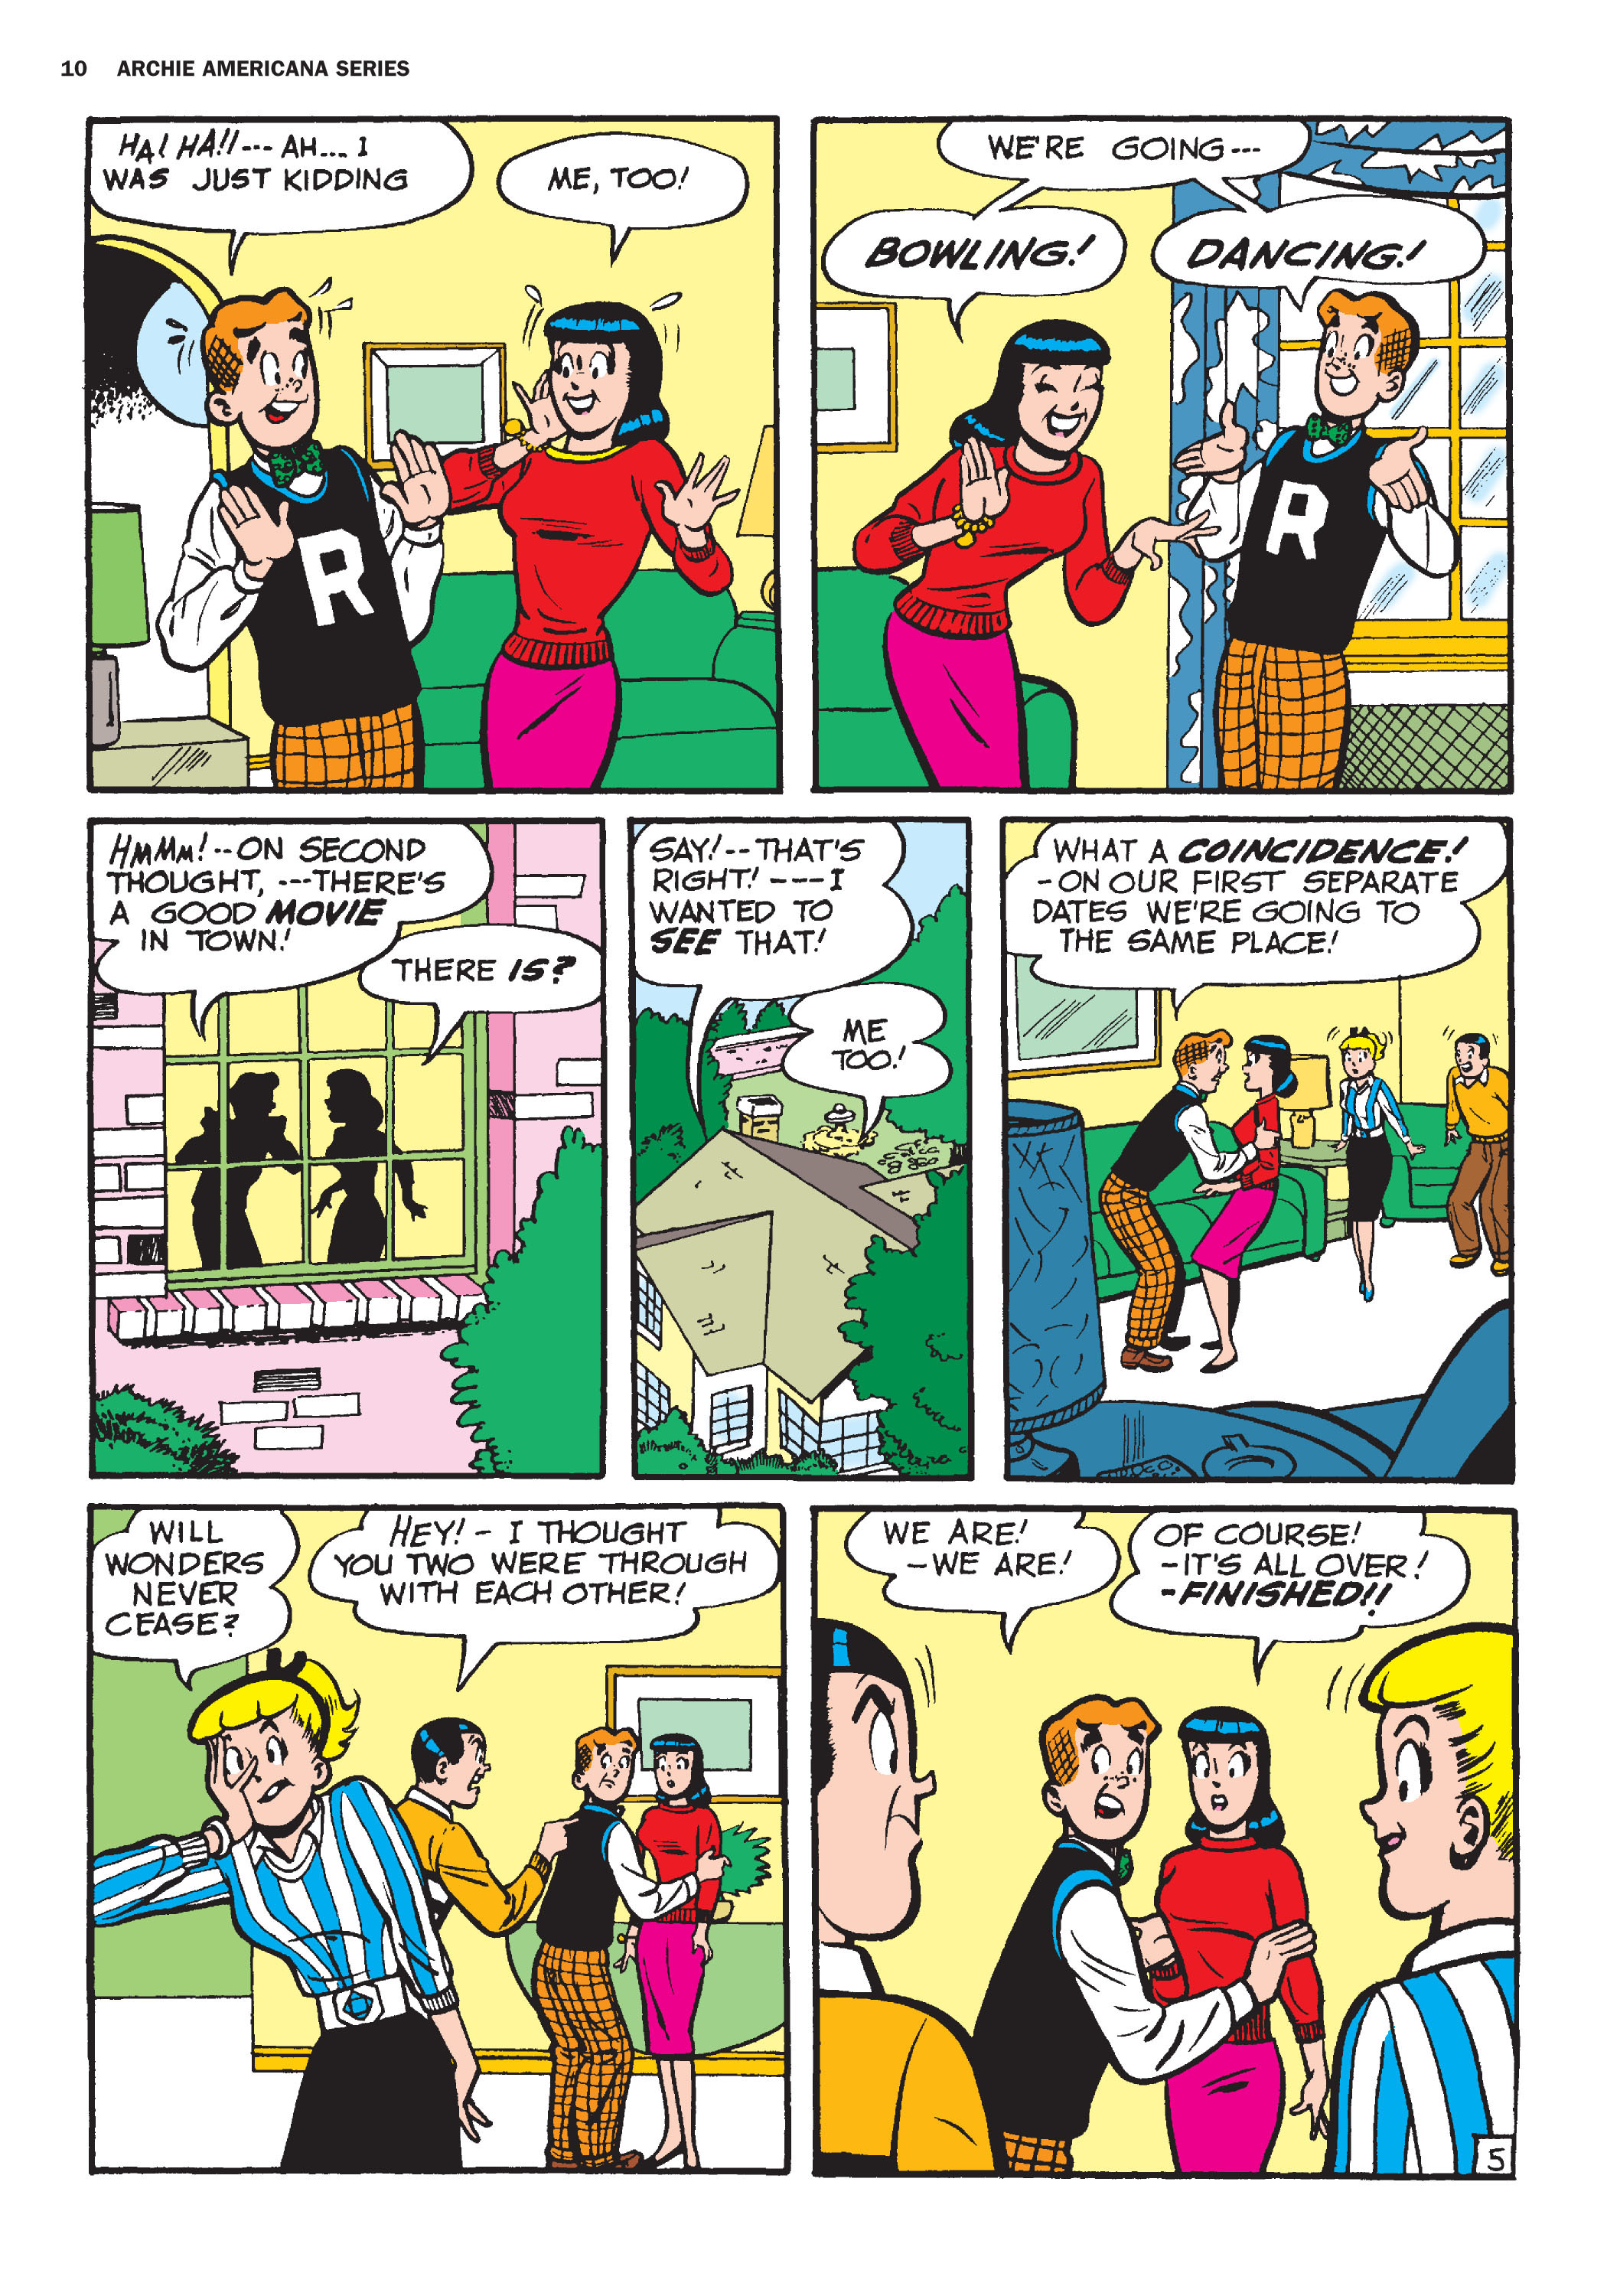 Read online Archie Americana Series comic -  Issue # TPB 8 - 11